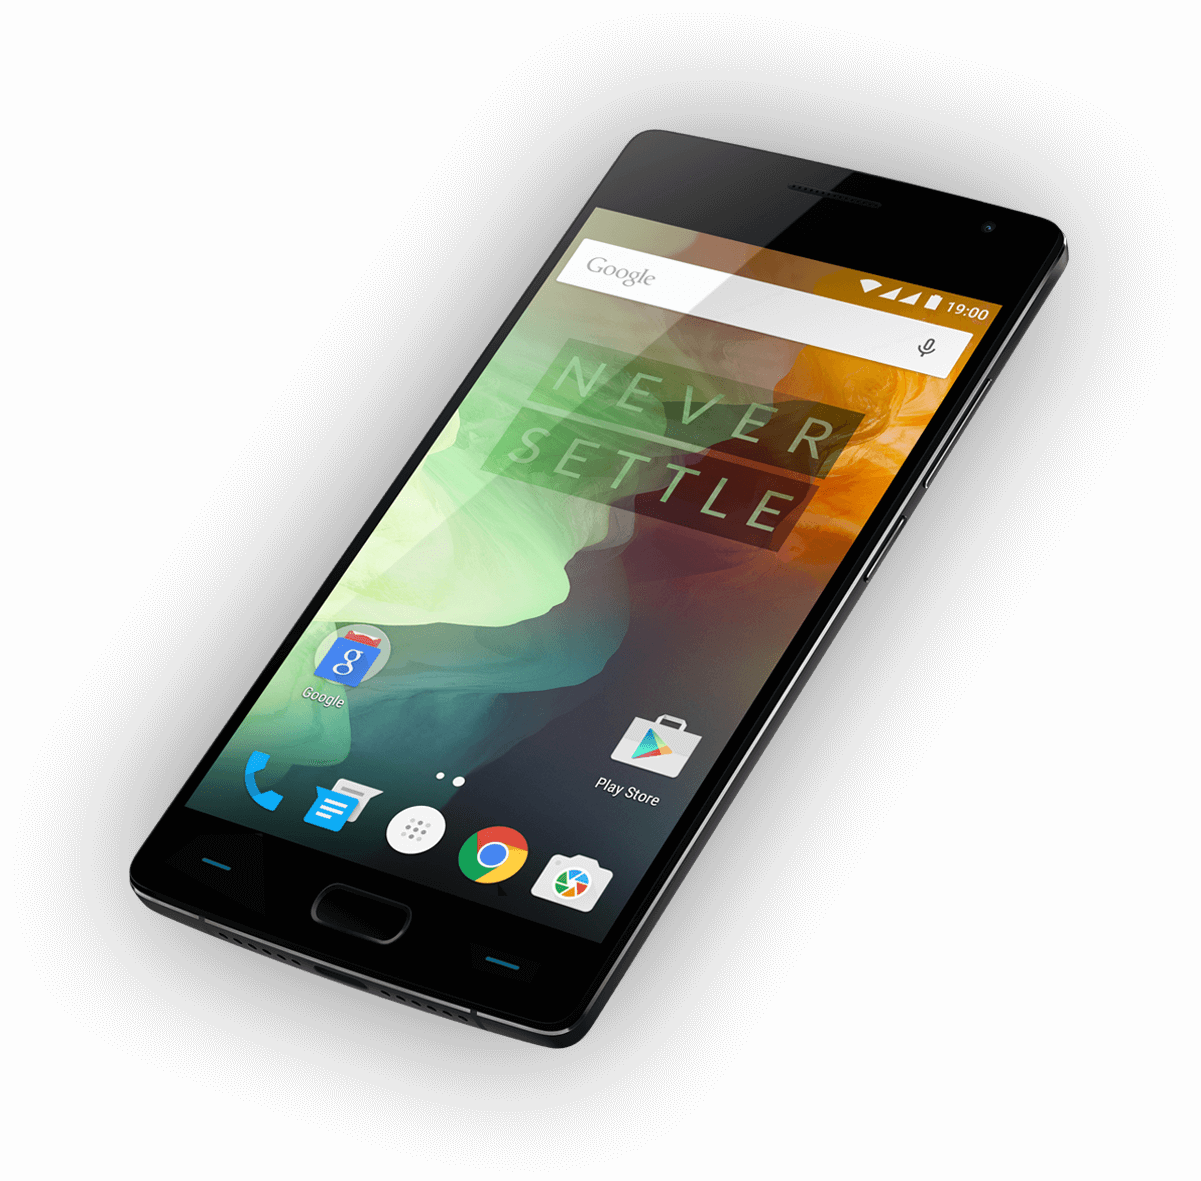 OnePlus 2 Available Black Friday With No Invite – ClintonFitch.com - Will Oneplus Have Black Friday Deals